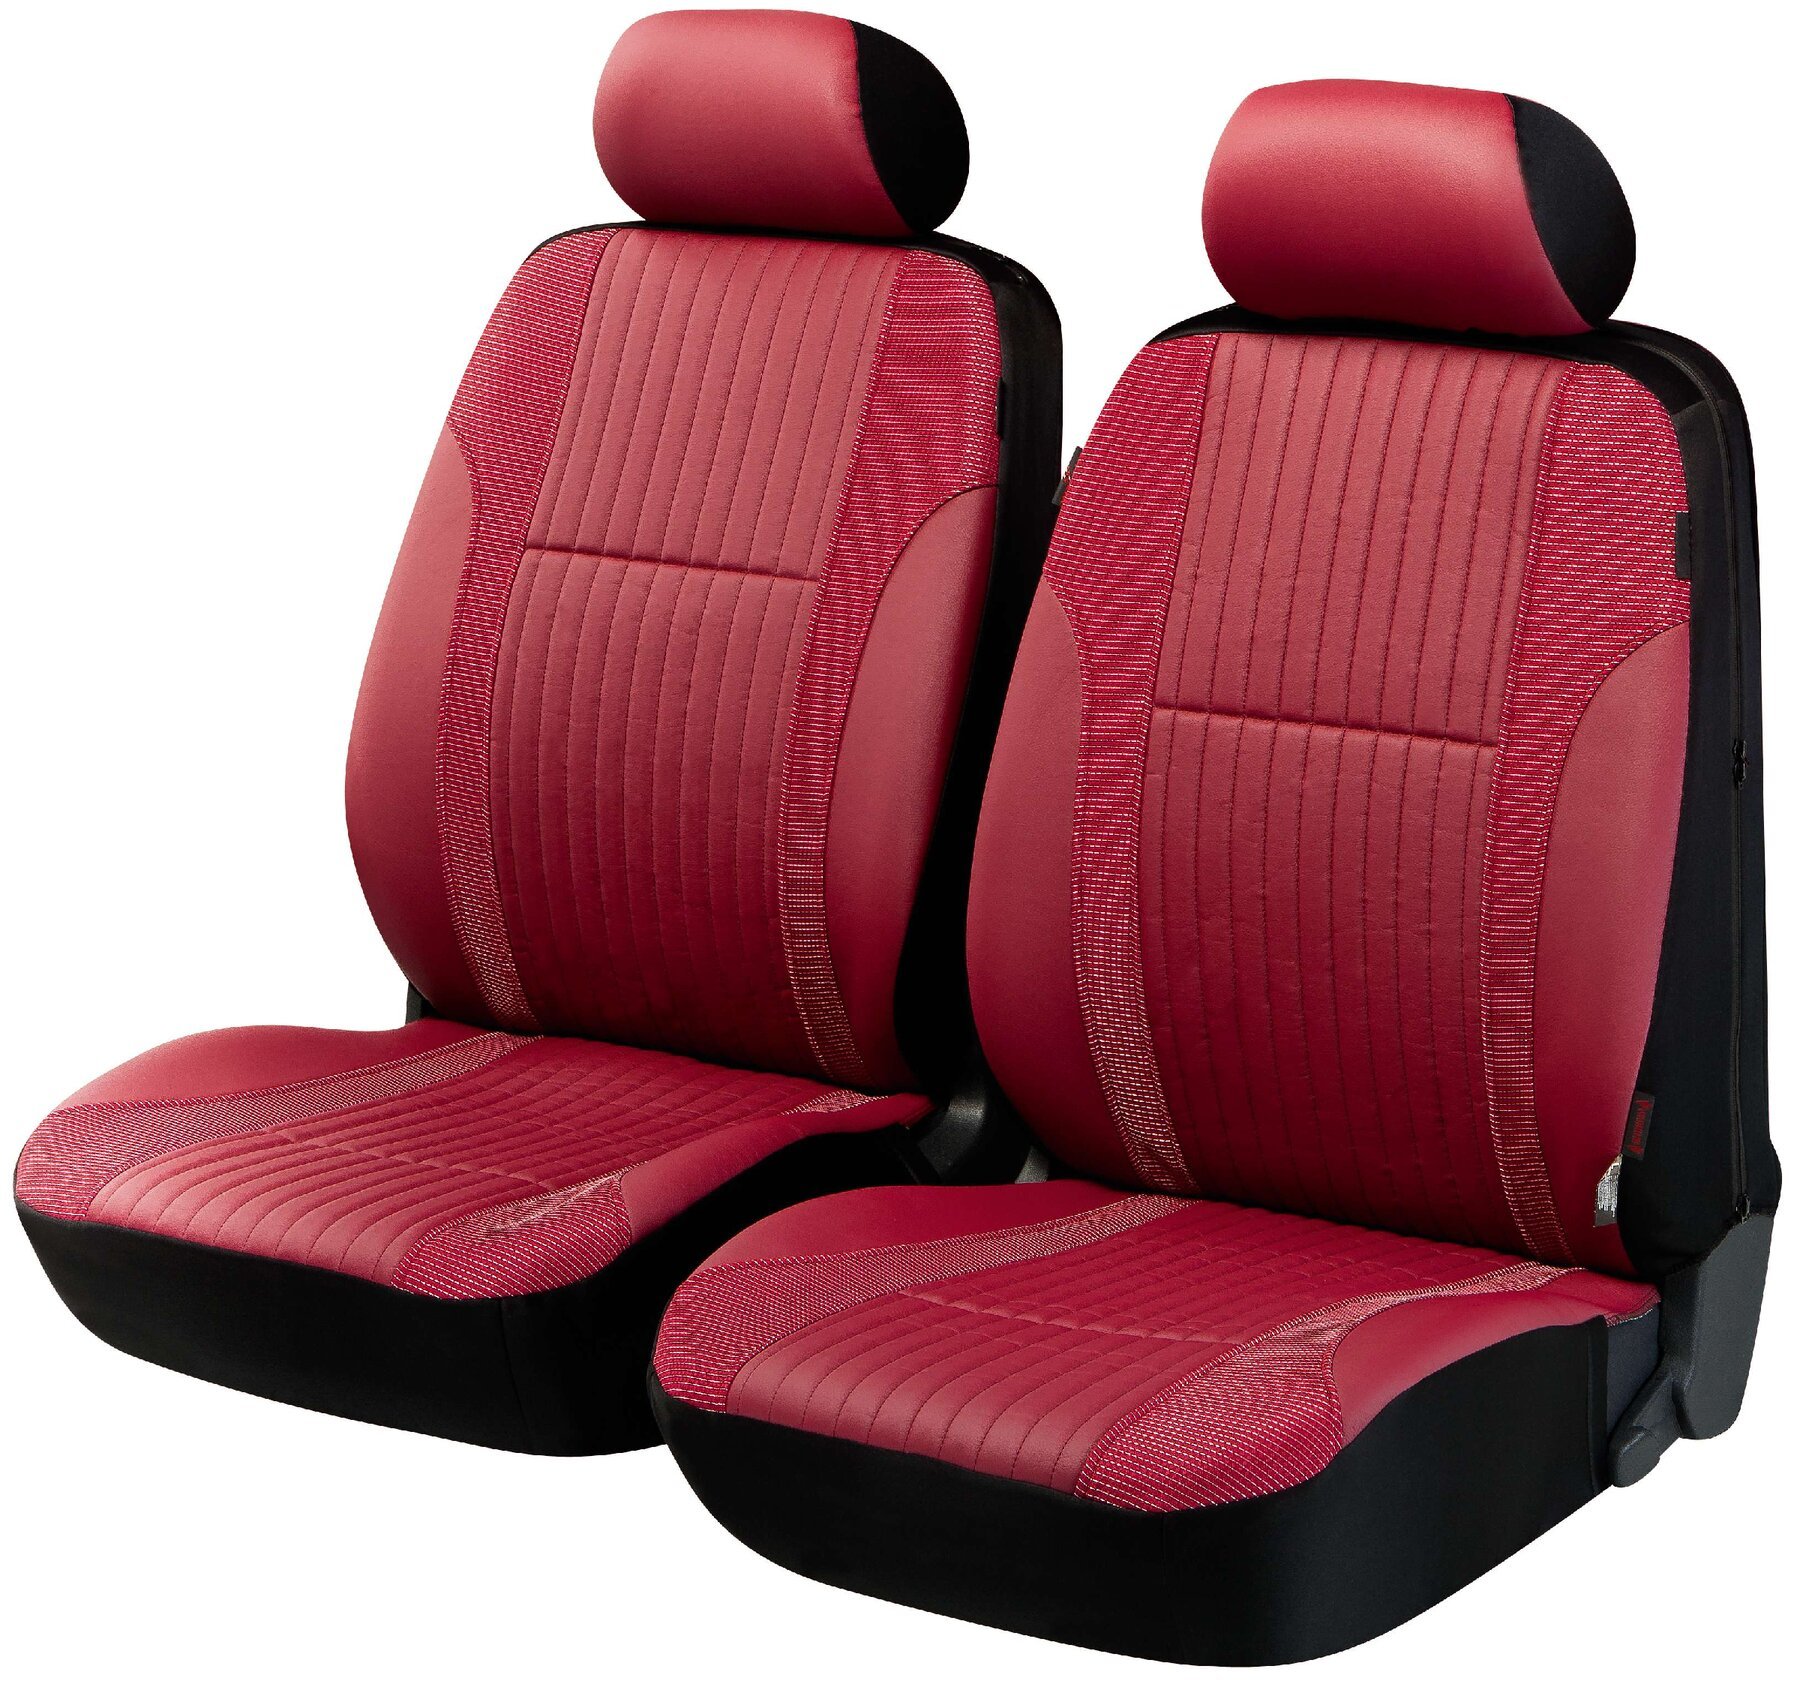 ZIPP IT Deluxe Medway car Seat covers in imitation leather for two front seats with zipper system